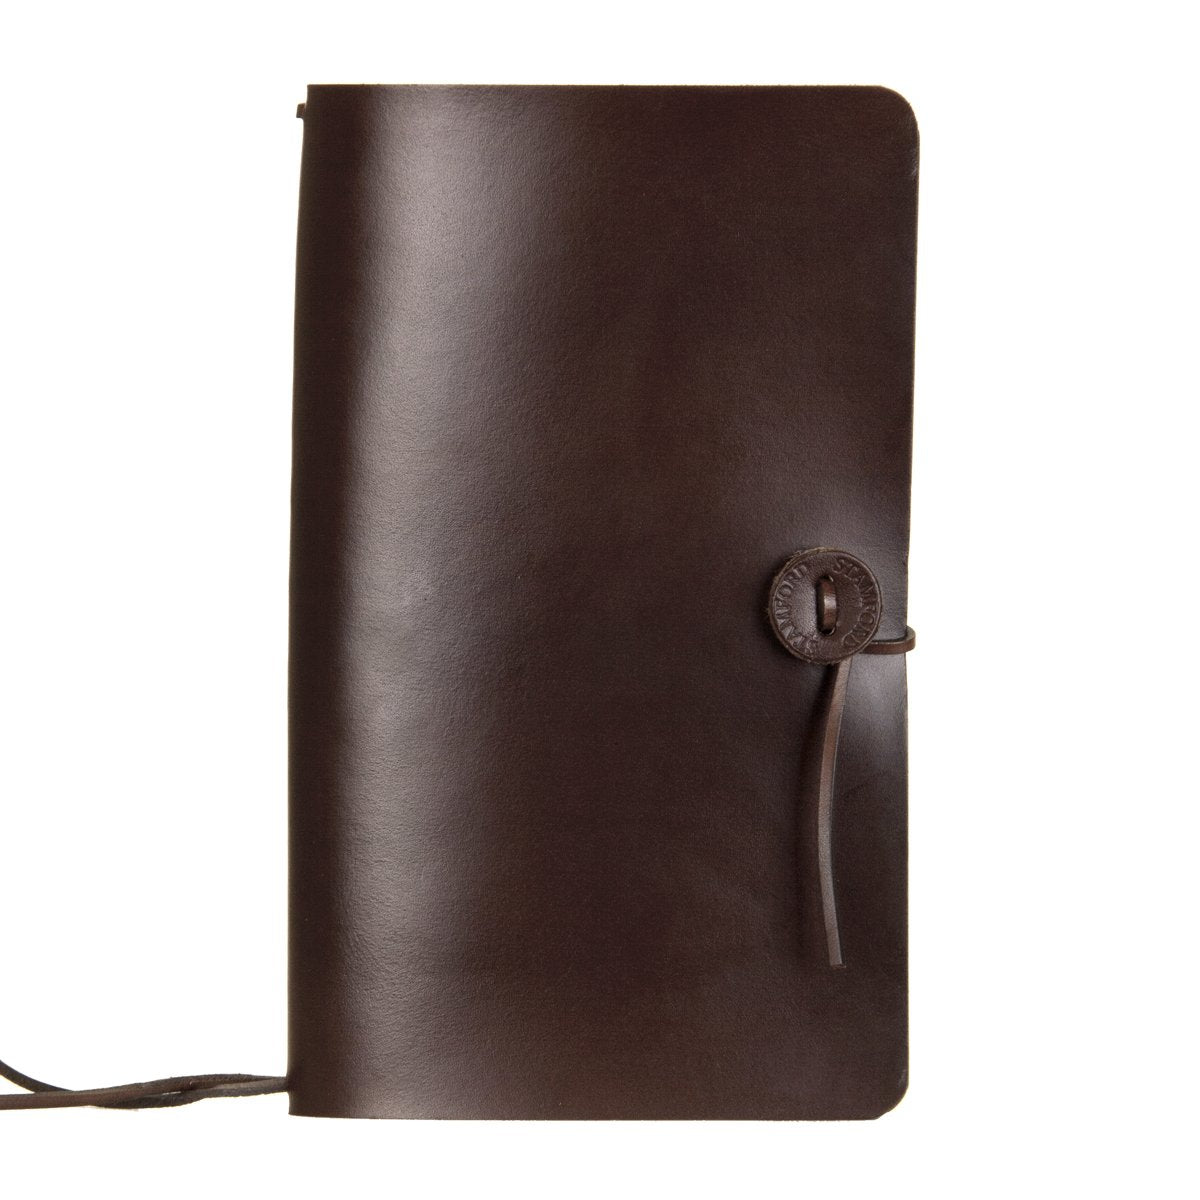 The Travellers Journal Classic Range